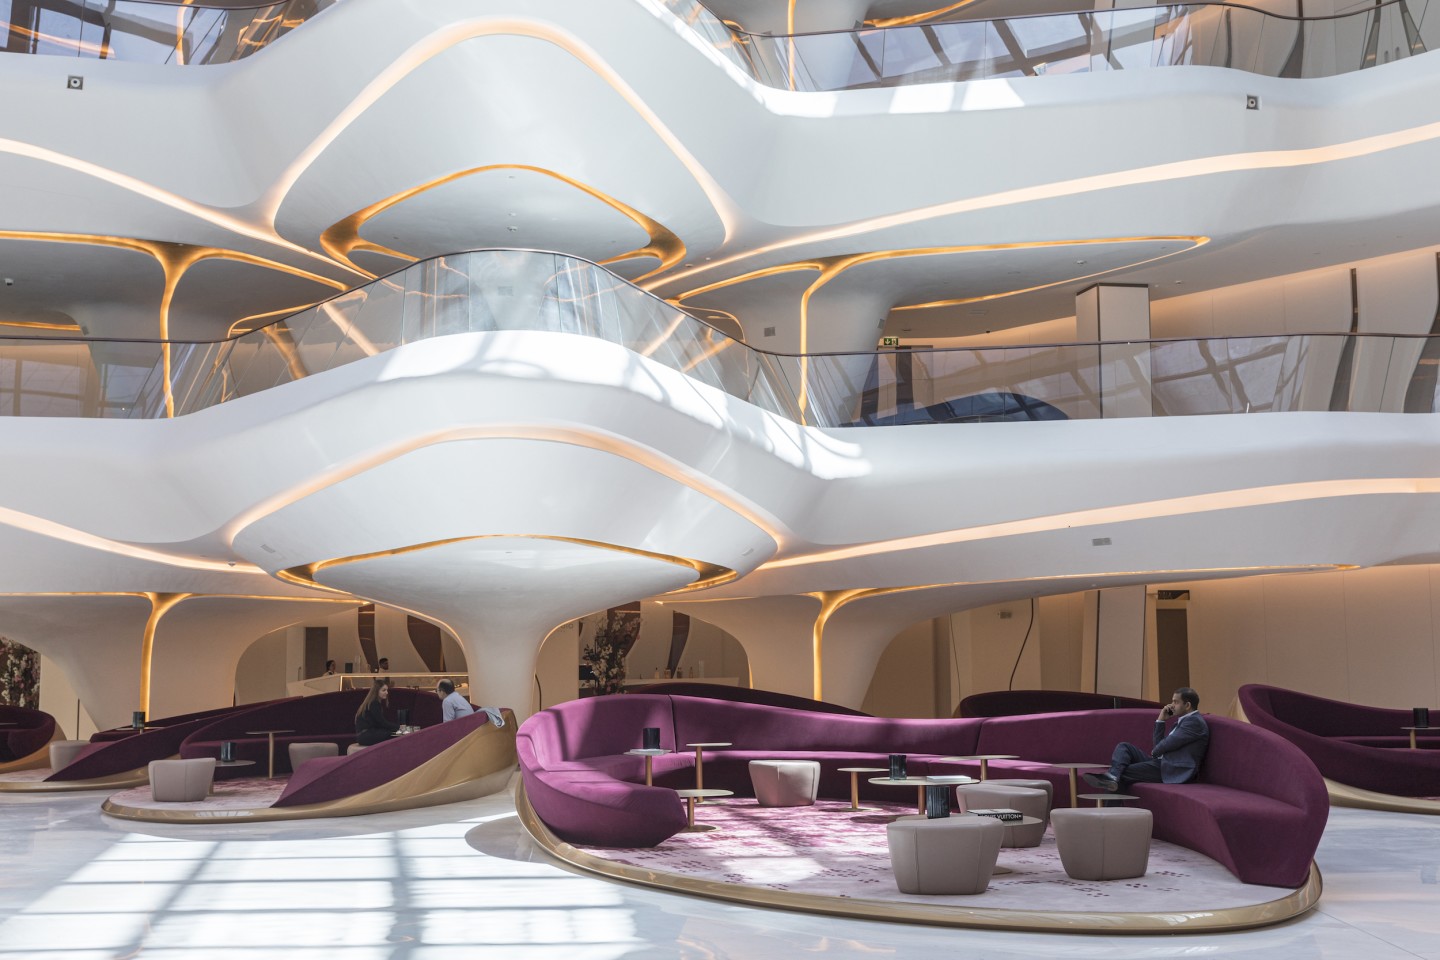 The Opus is the only hotel to have both its exterior and interior designed by the late starchitect Zaha Hadid herself